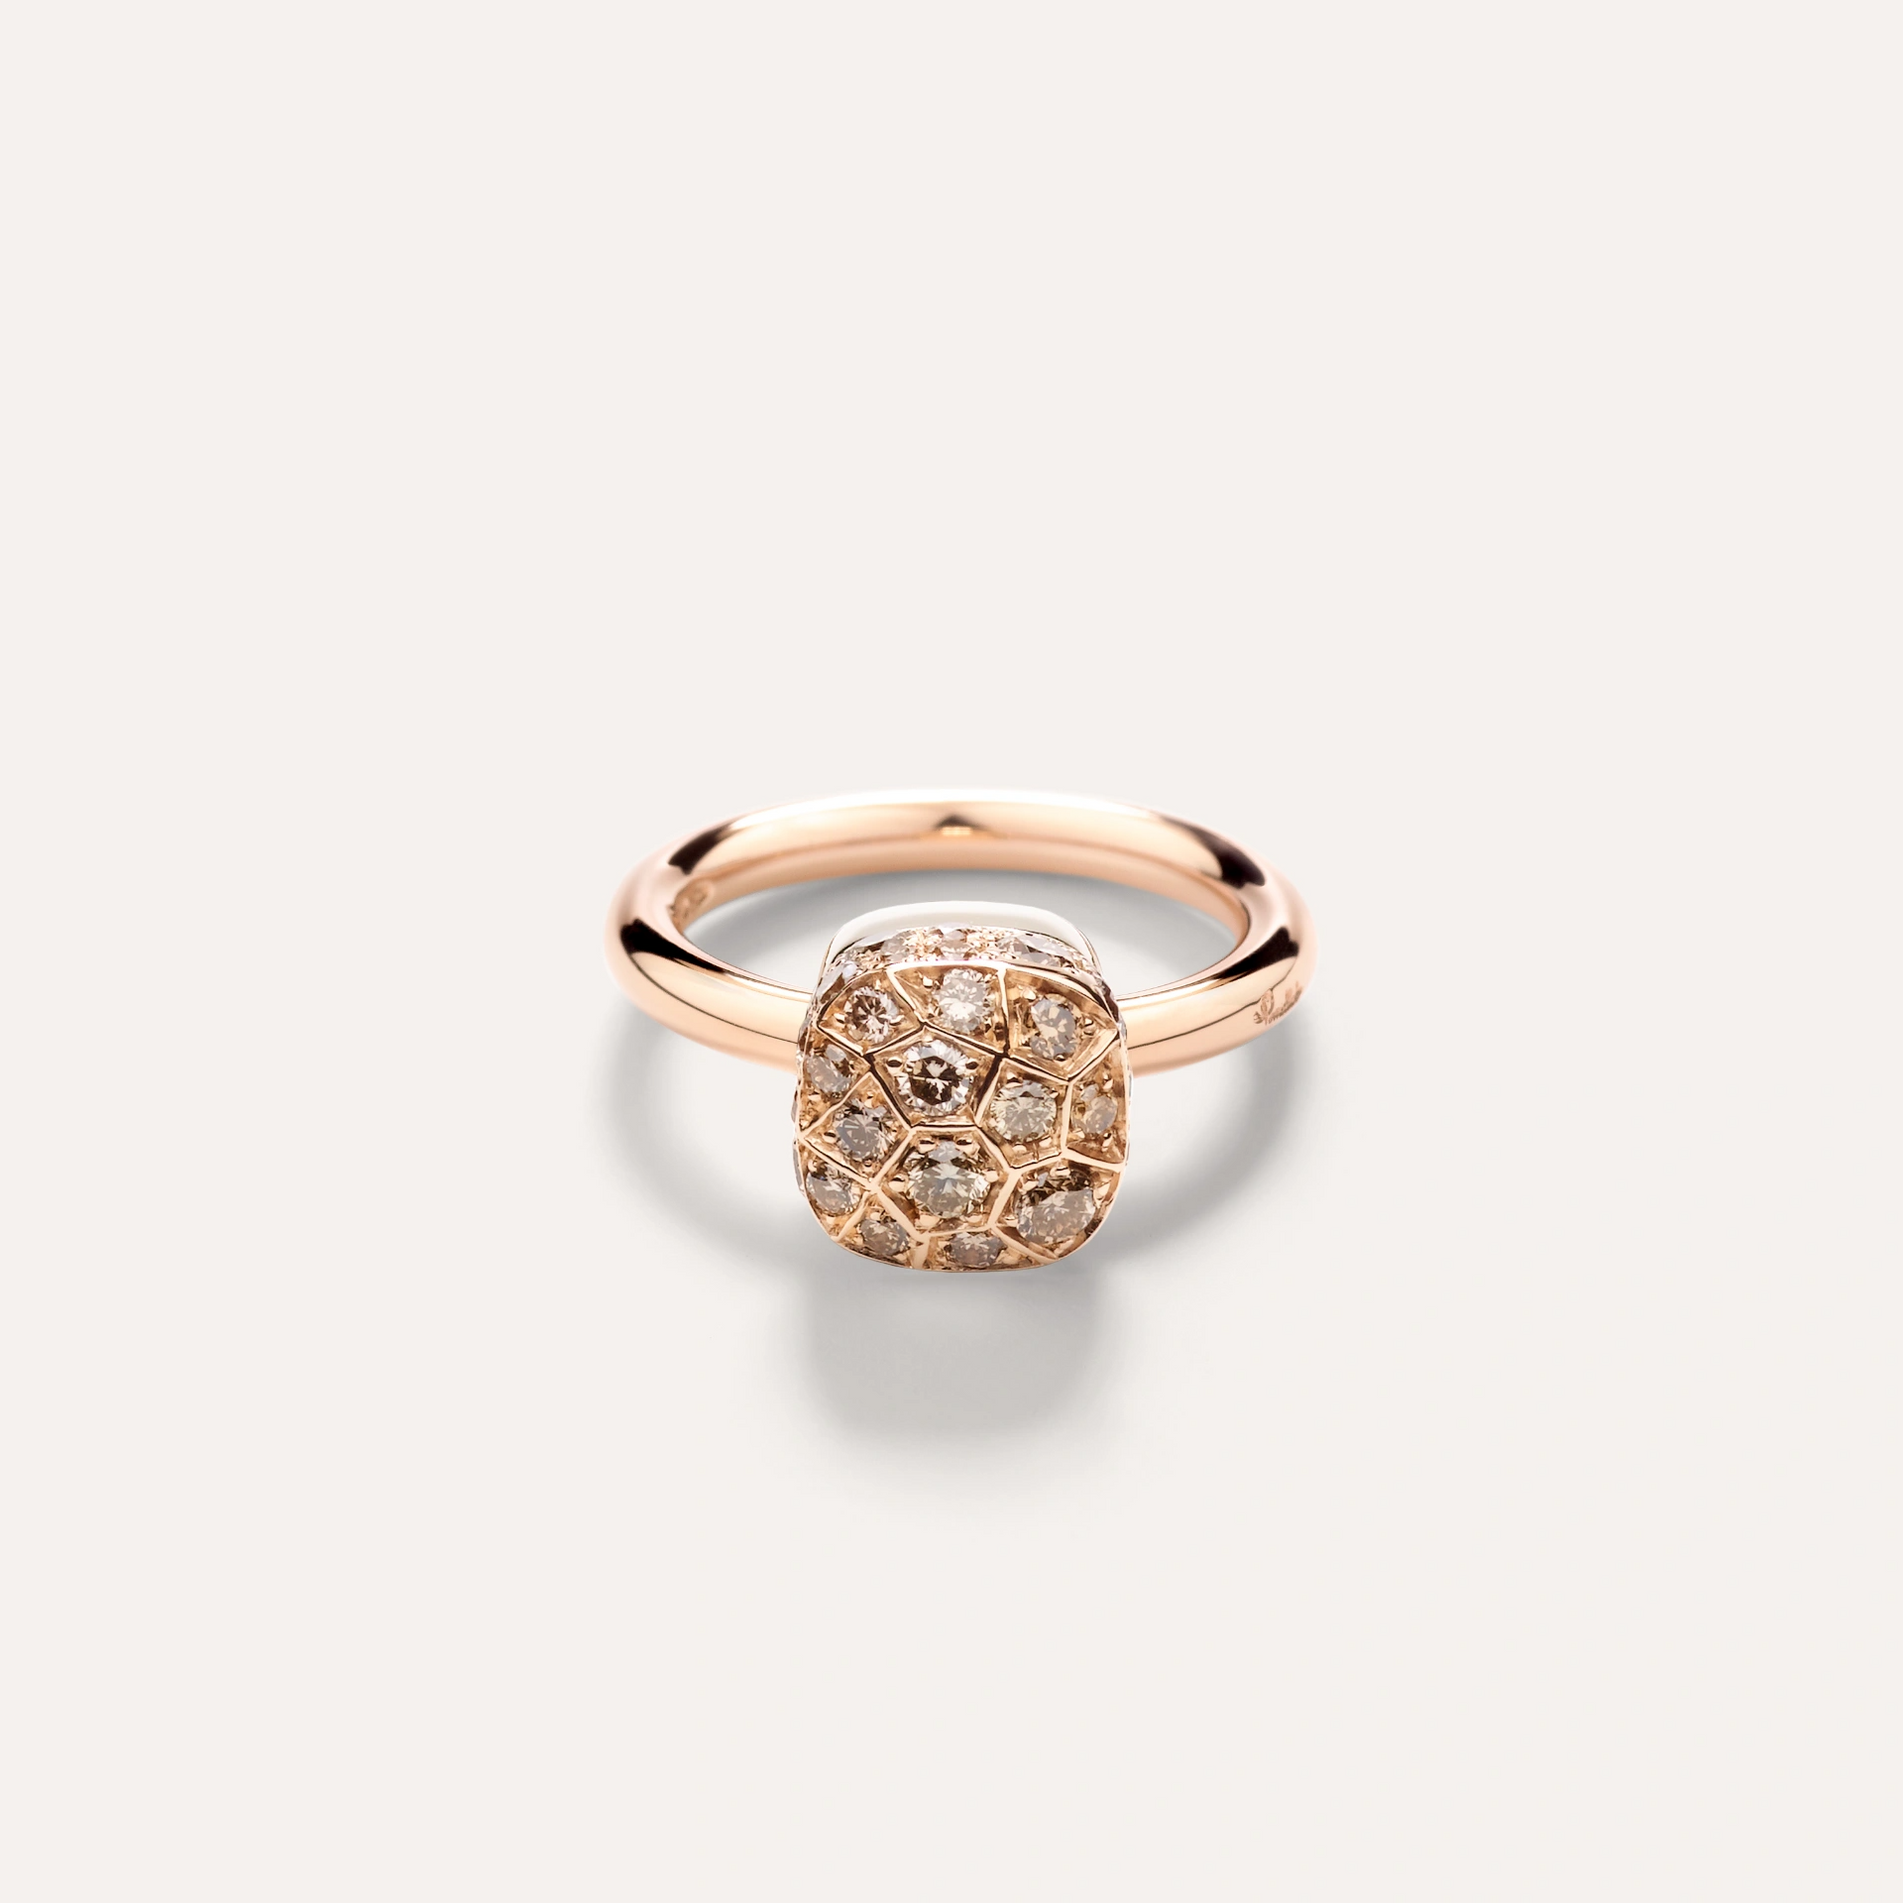 Pomellato Nudo Petit Ring in 18k Rose and White Gold with Brown Diamonds